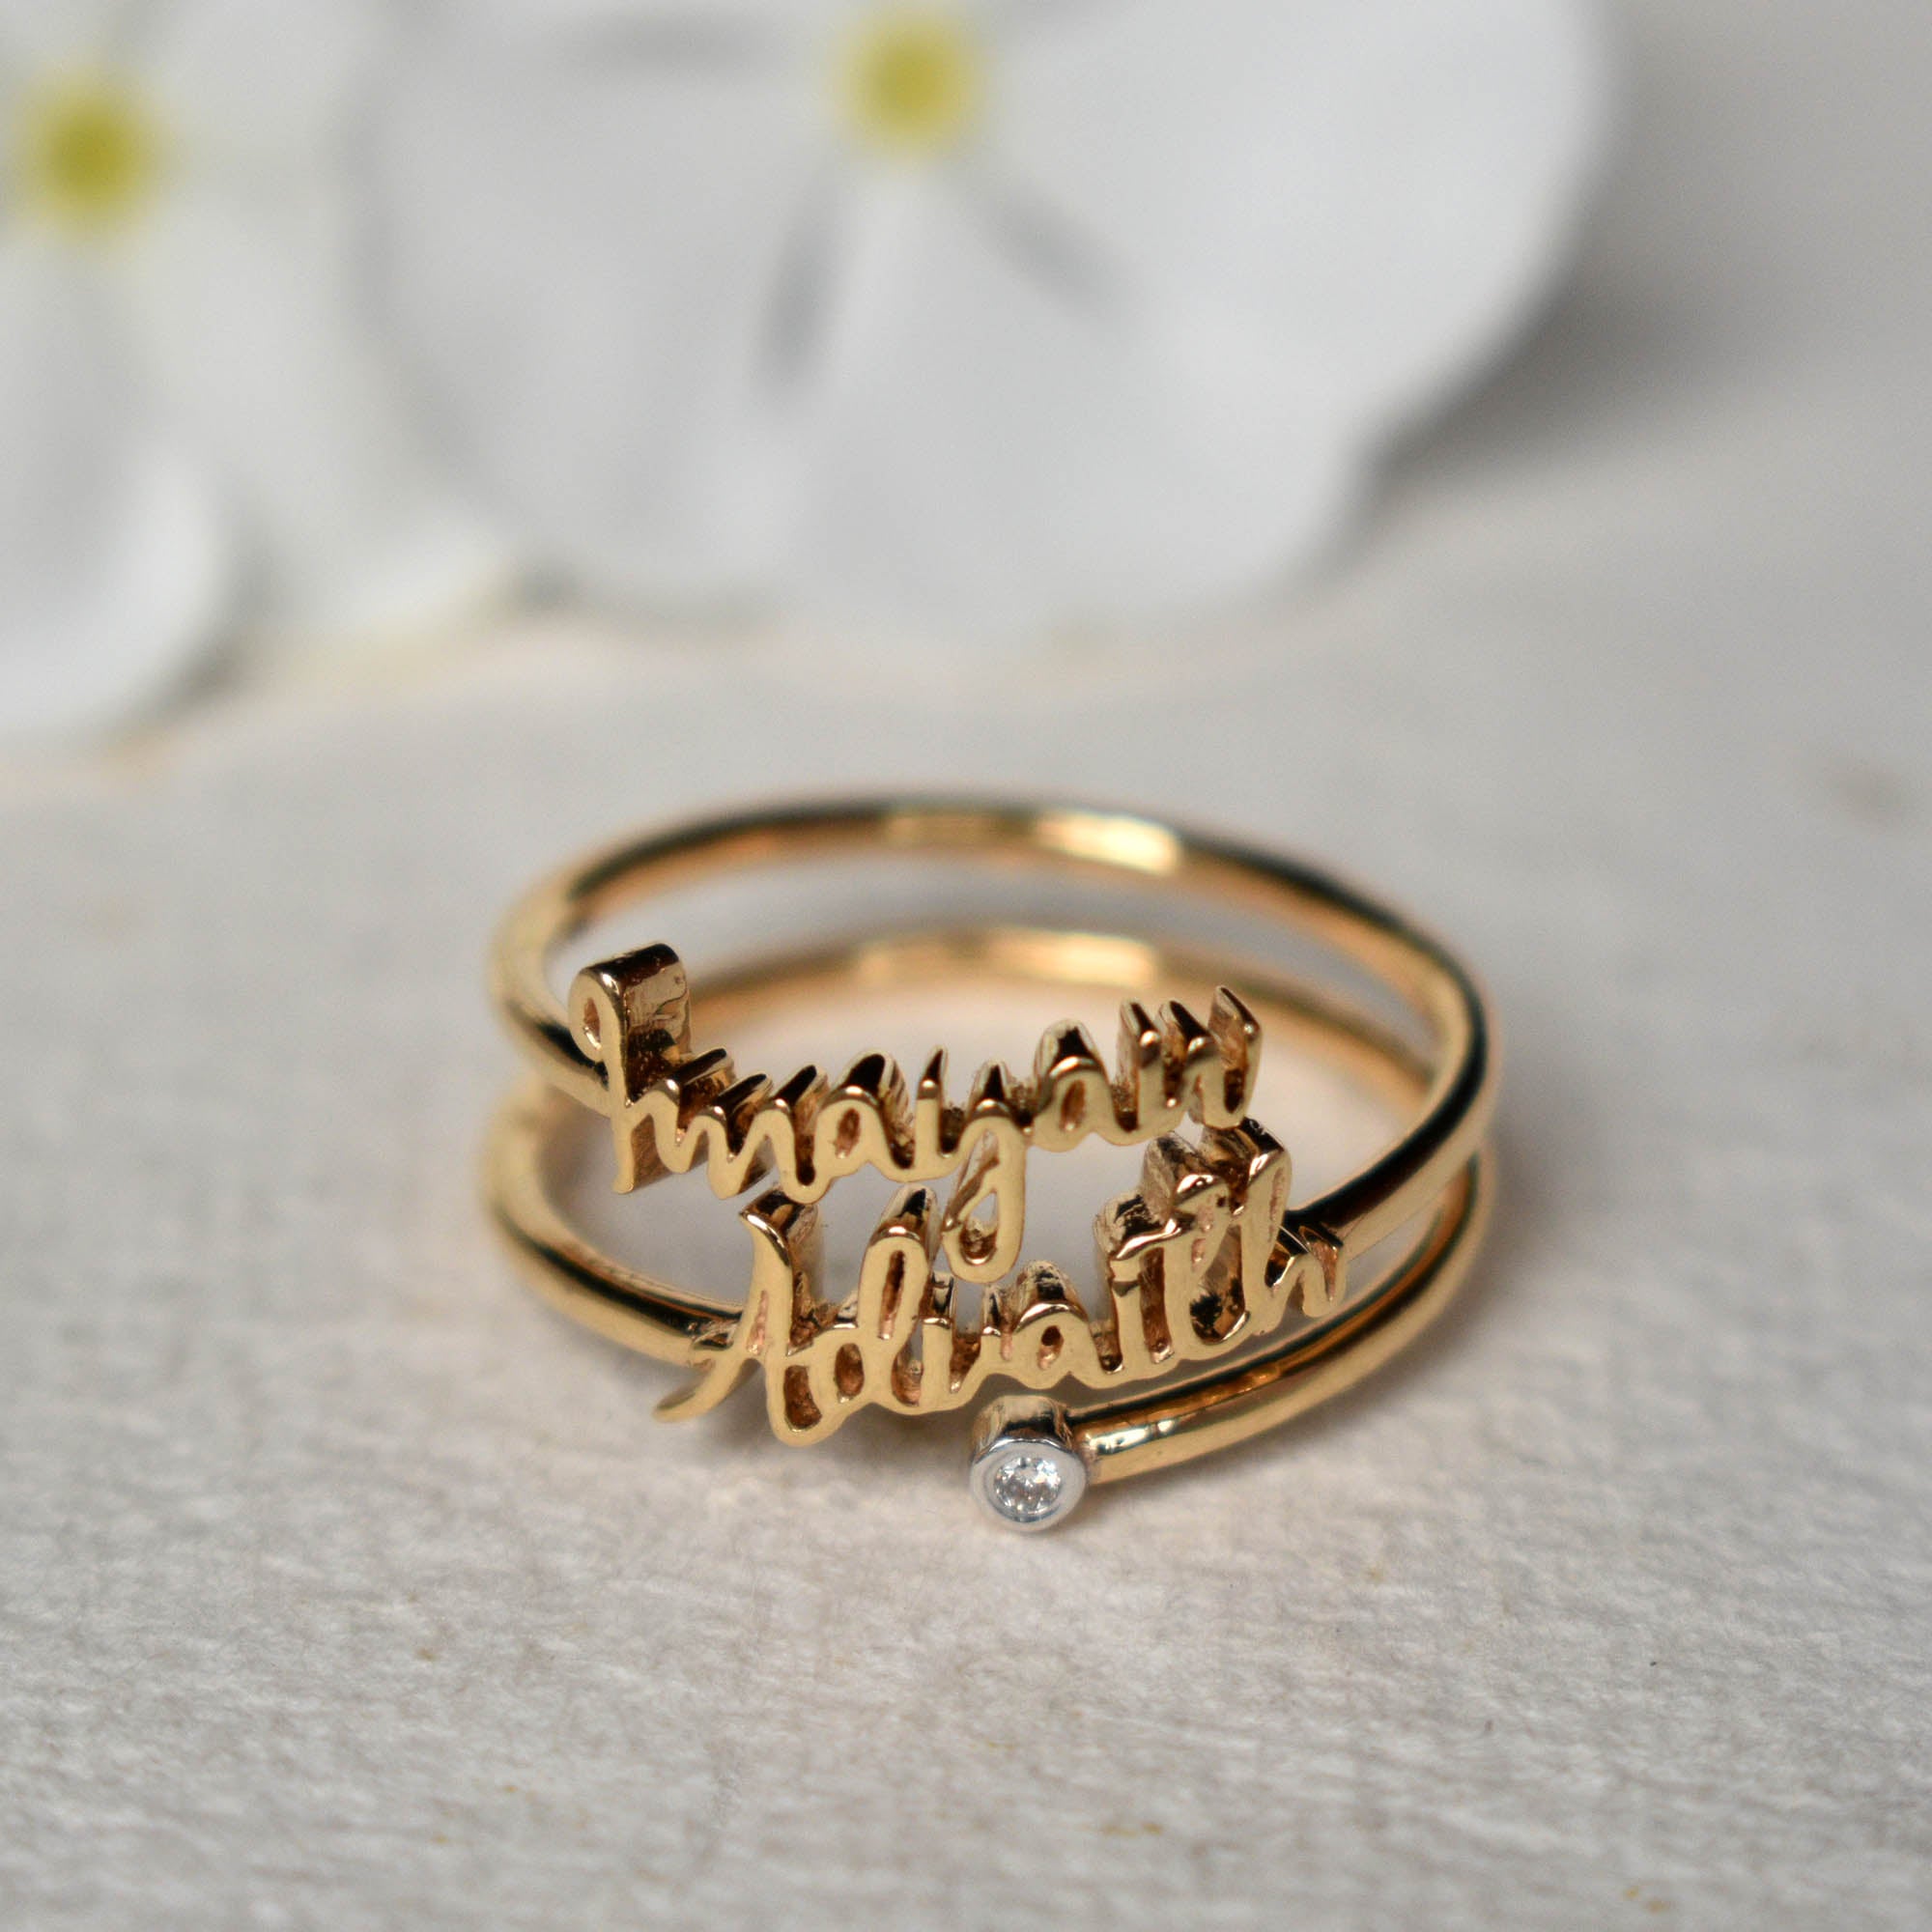 Old English Name Ring, Personalized Name Ring, Custom Name Ring, Dainty  Name Ring, Mothers Day Gift, Gift for Her - Etsy | Name rings, Fashion rings,  Gold bar earrings studs